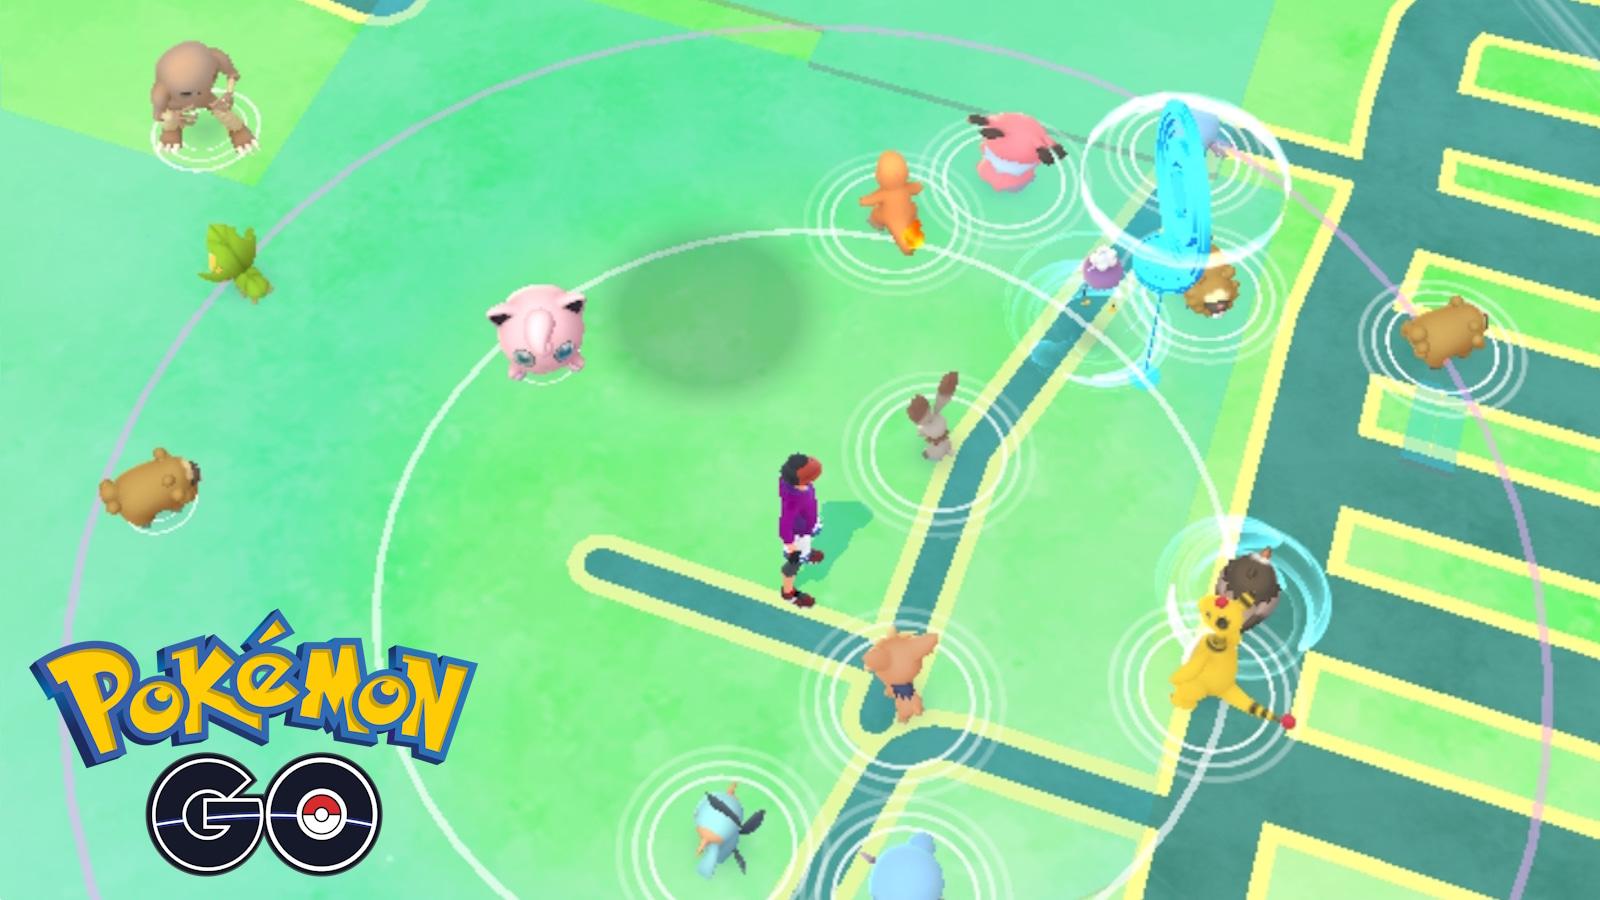 Pokemon Go update 0.275 makes major change for finding nearby